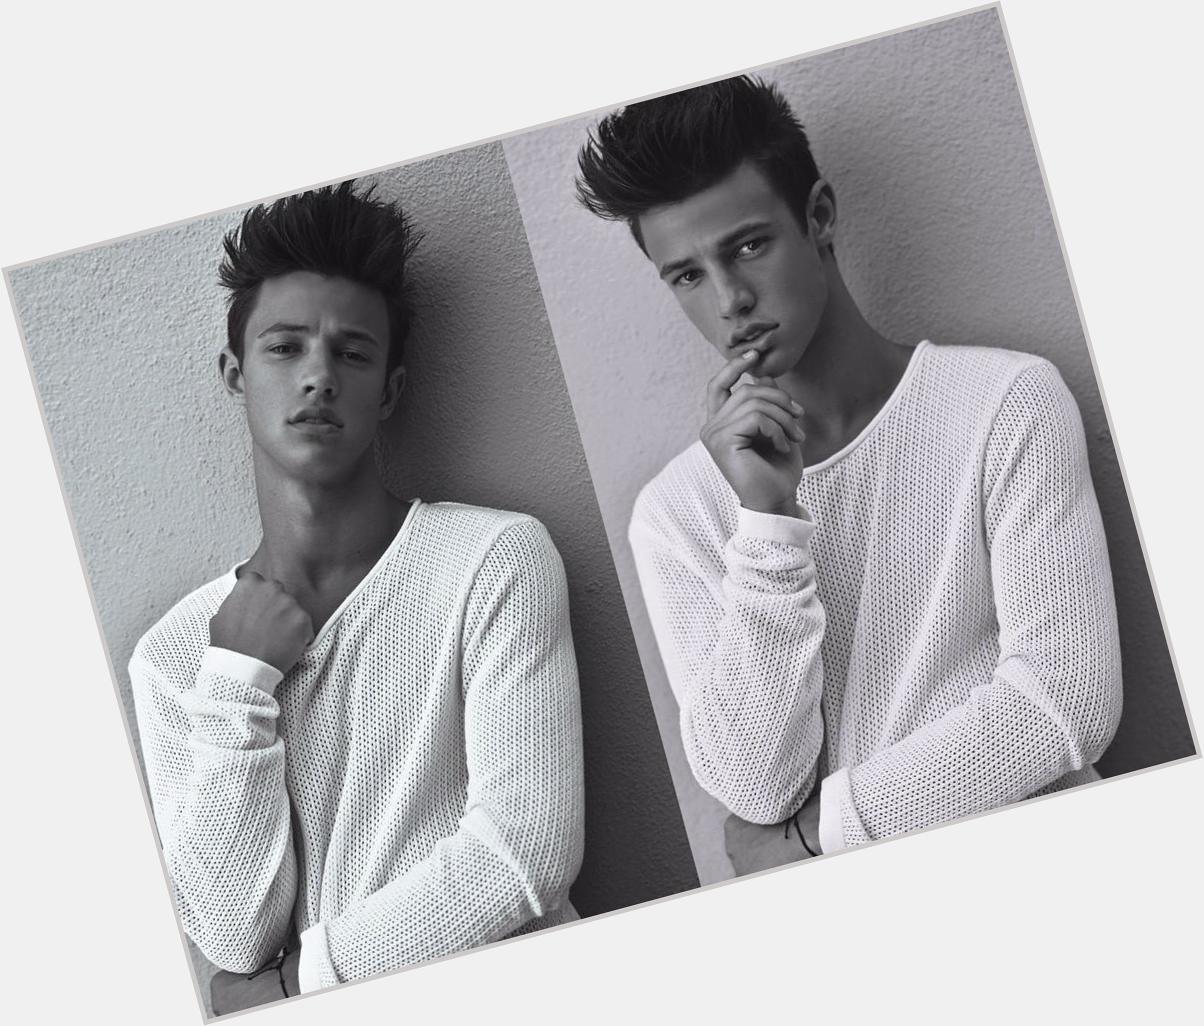 HAPPY BIRTHDAY MY LOVELY CAMERON DALLAS I hope u have a great day     